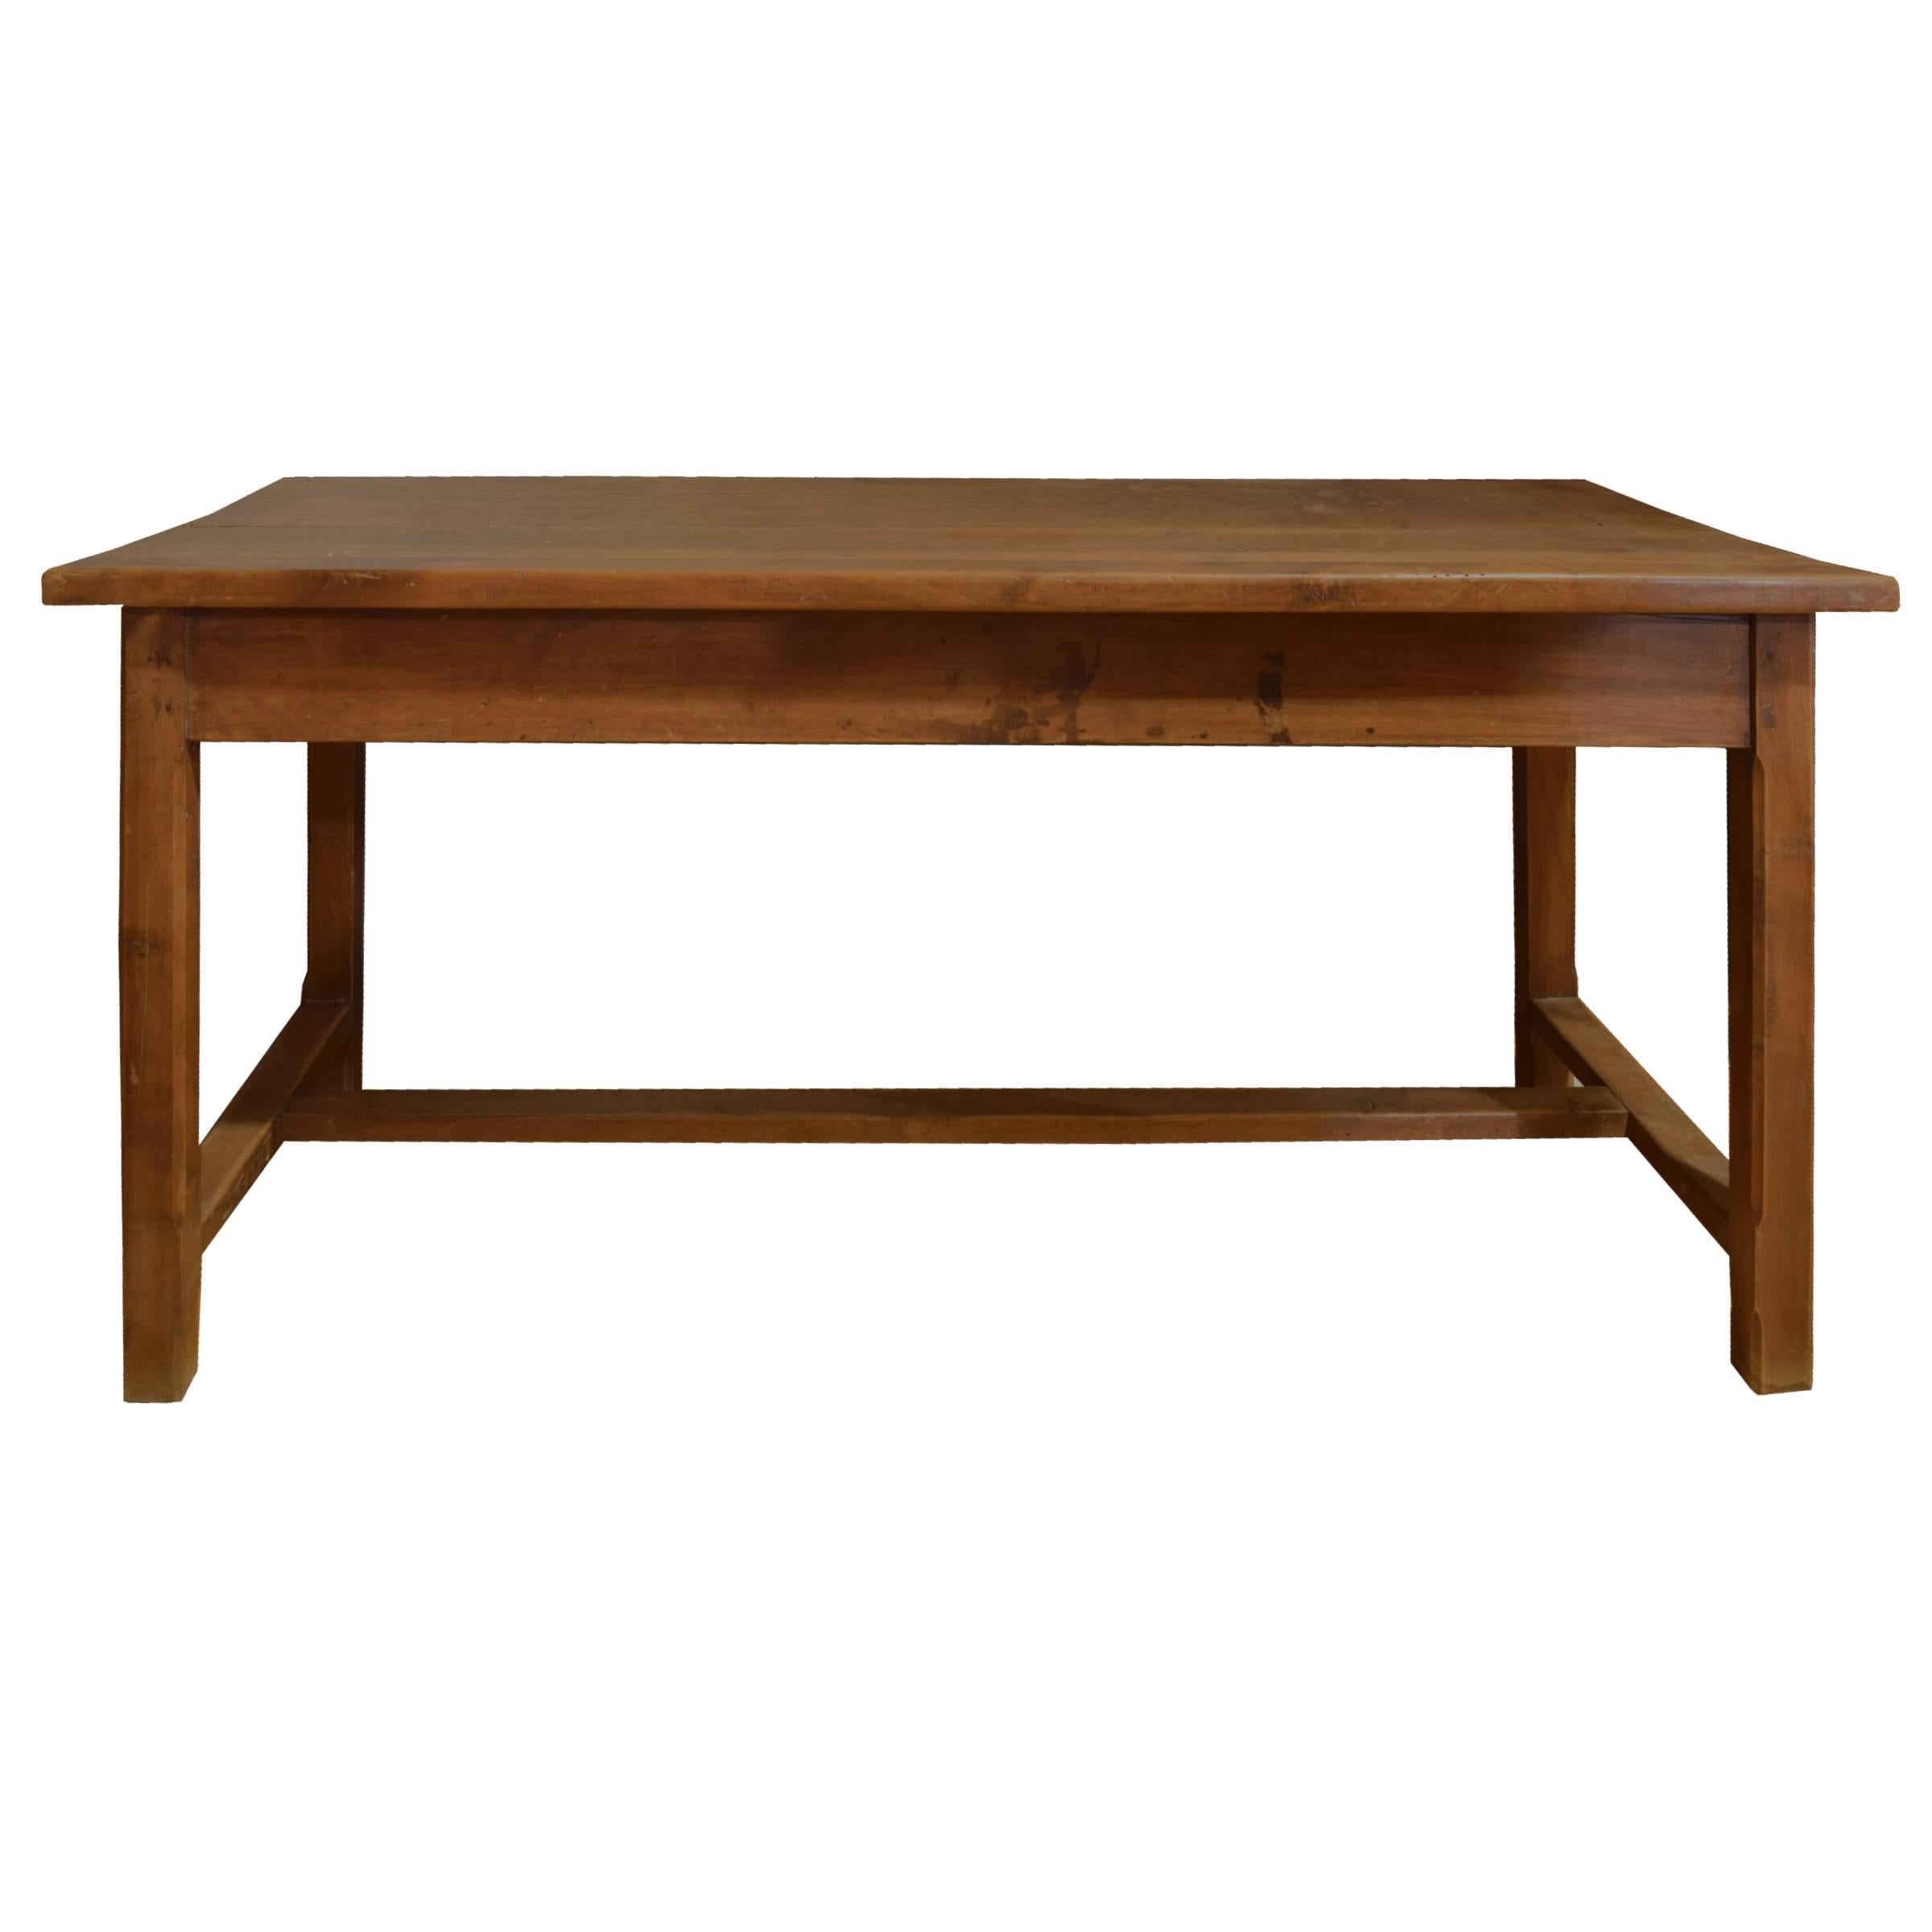 A French walnut farm table with a drawer on each end with brass hardware, stretchers across two legs, a central trestle, with great patina, early 20th century.